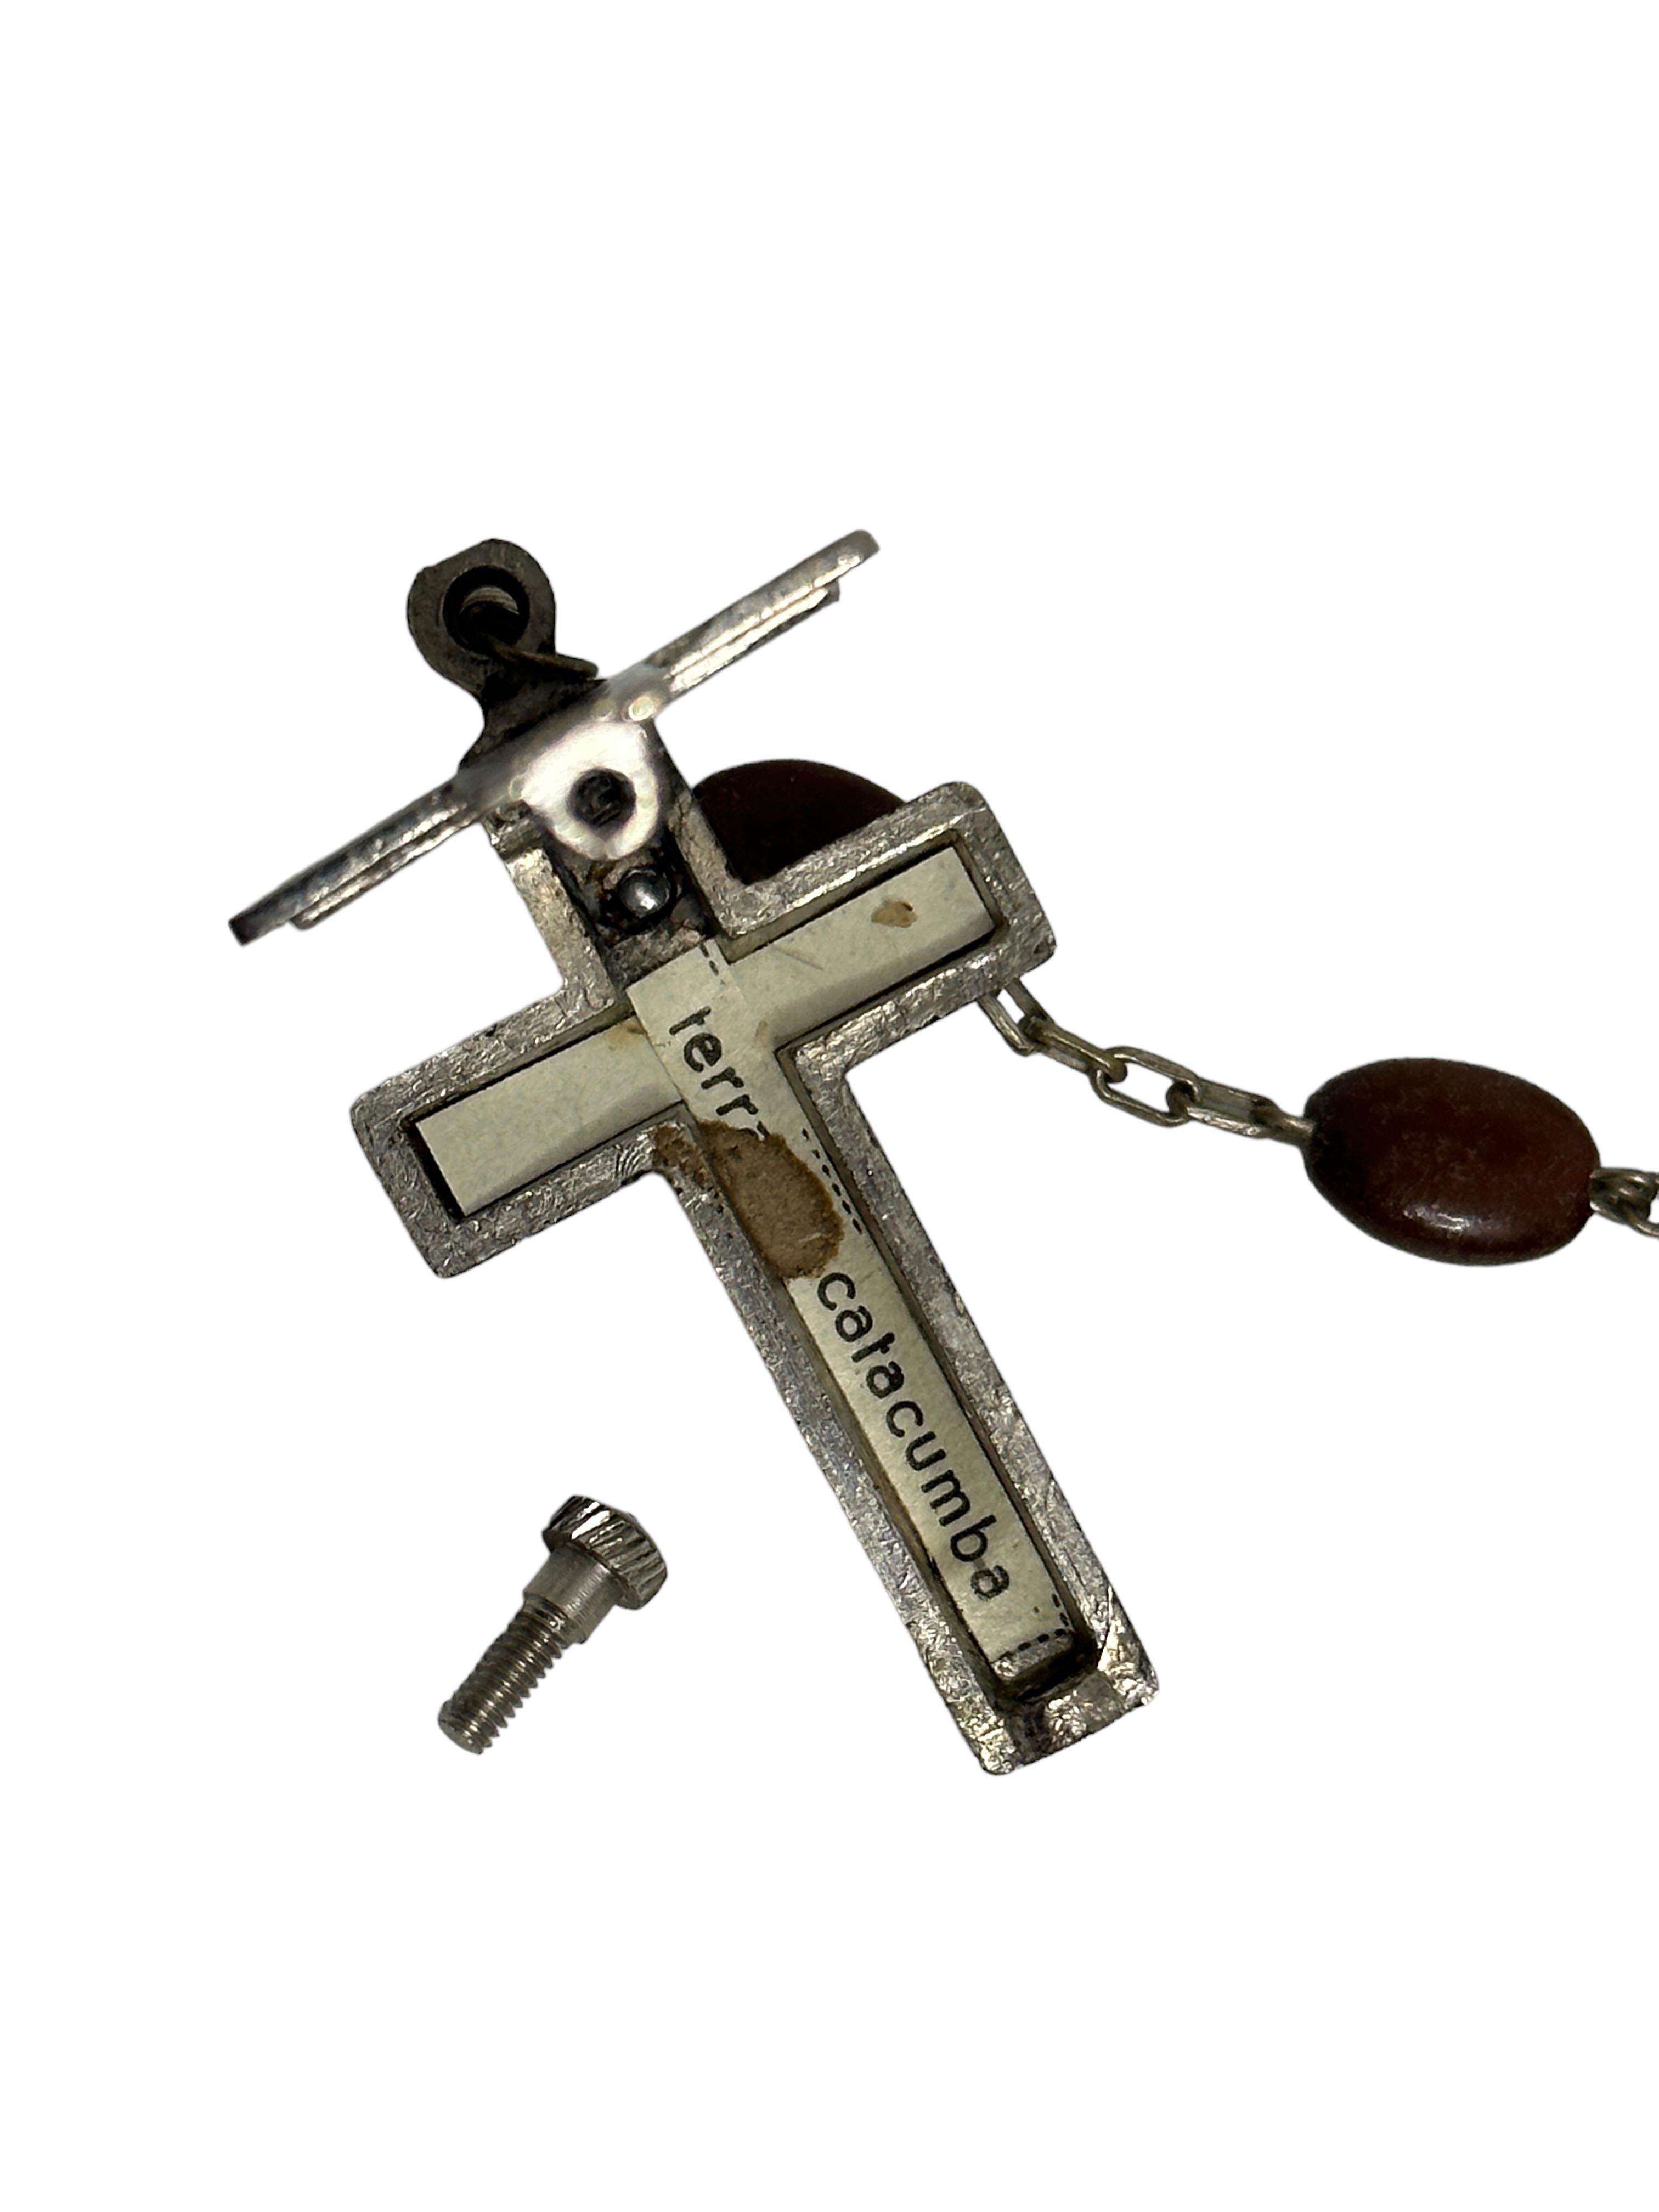 Metal Rosary Catholic Reliquary Box Crucifix Pendant with Relics of Catacombs of Rome For Sale